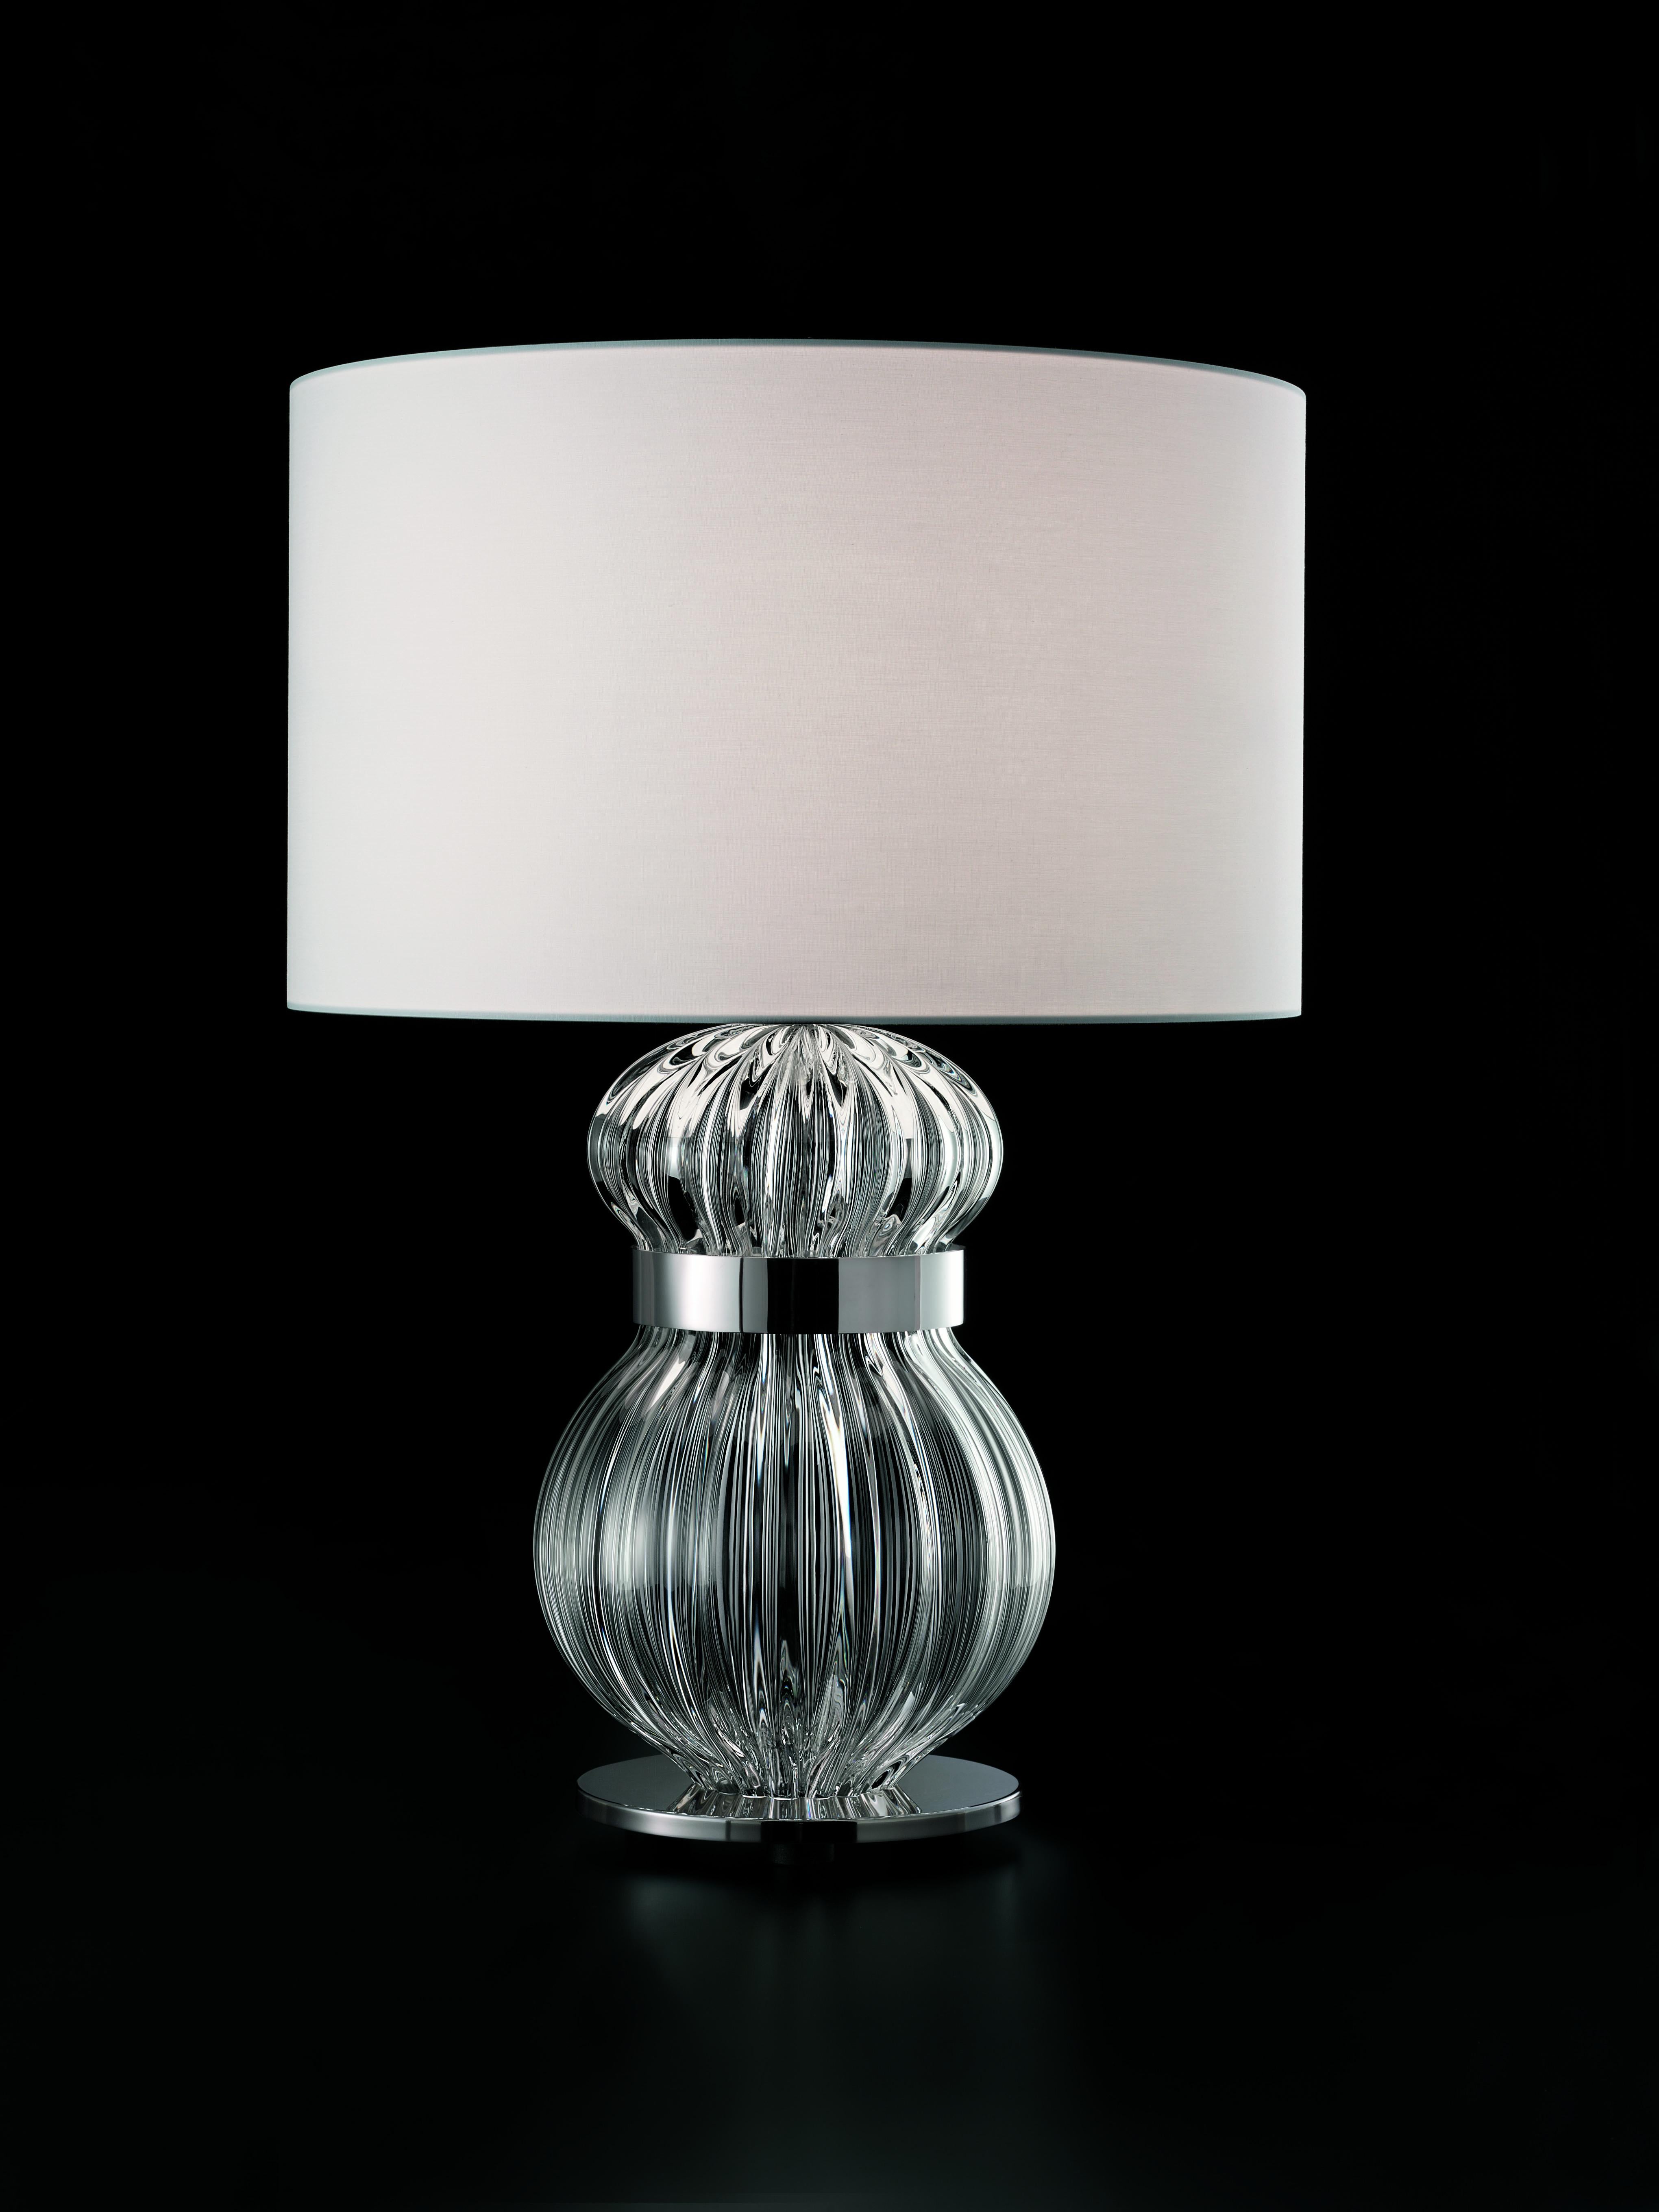 Polished Medina 5686 Table Lamp in Glass with White Shade by, Barovier&Toso